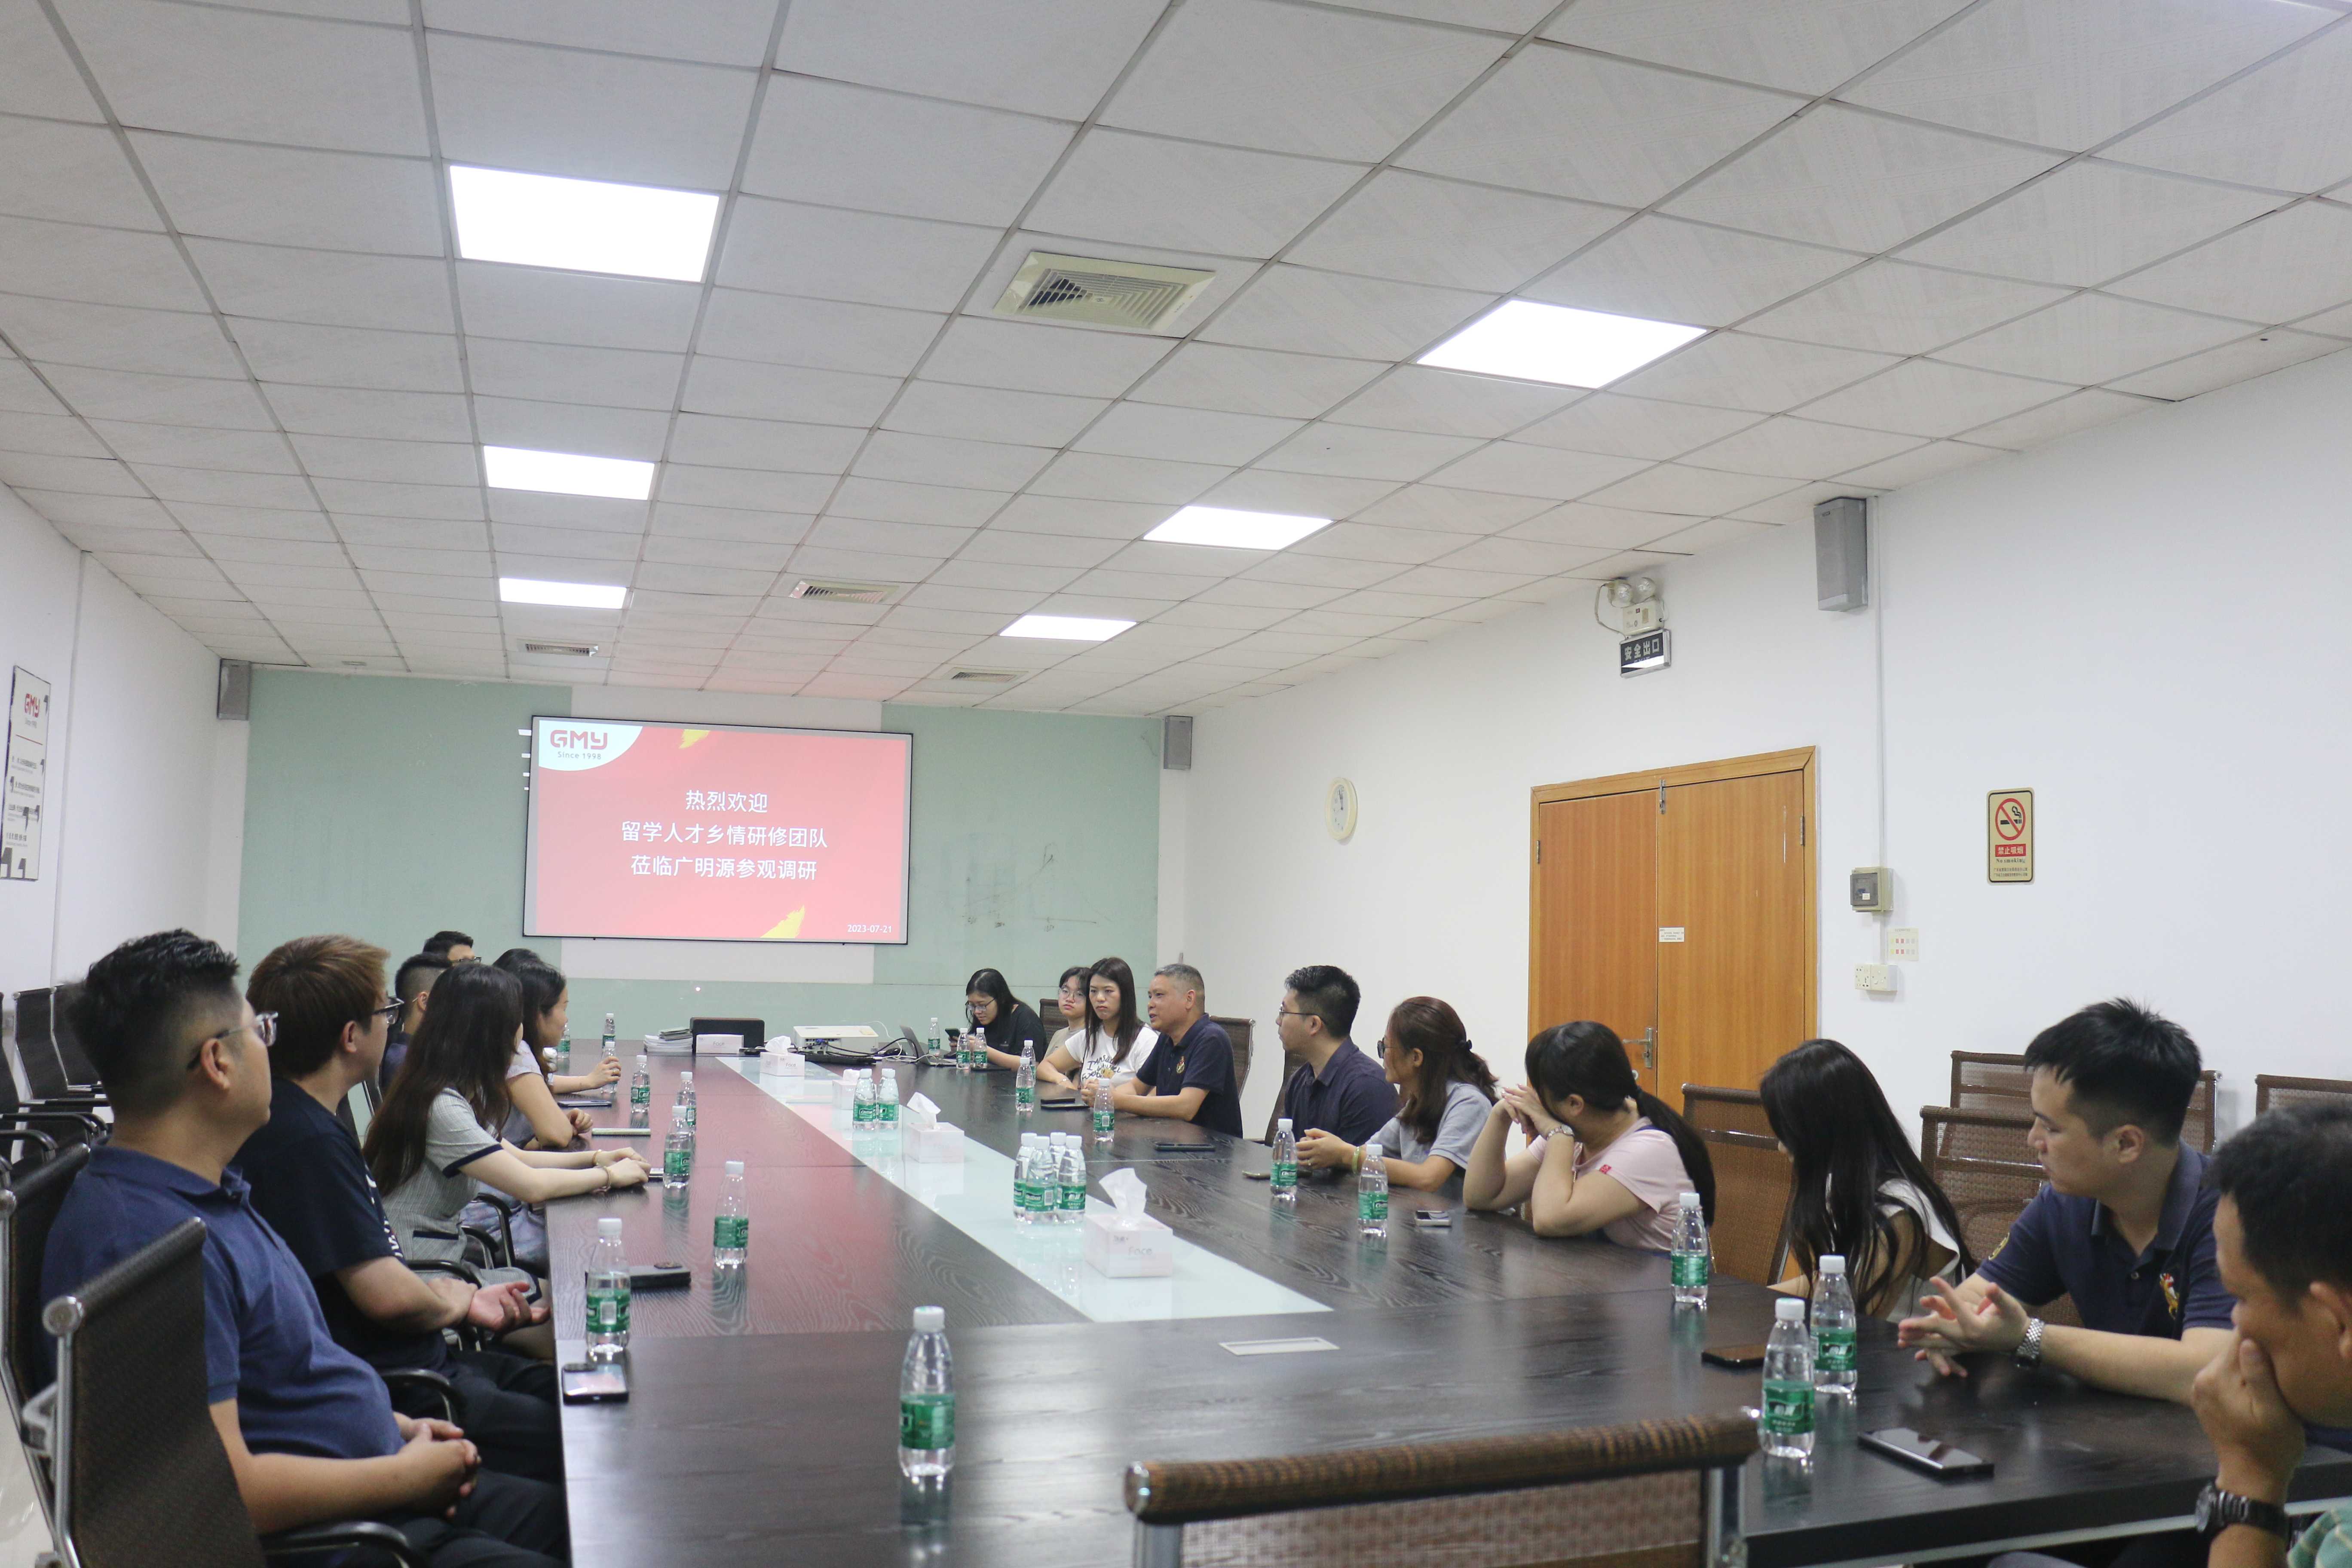 Members of the study team of the Municipal International Students Association had an active exchange and interaction with Vice President Yang Huazhang